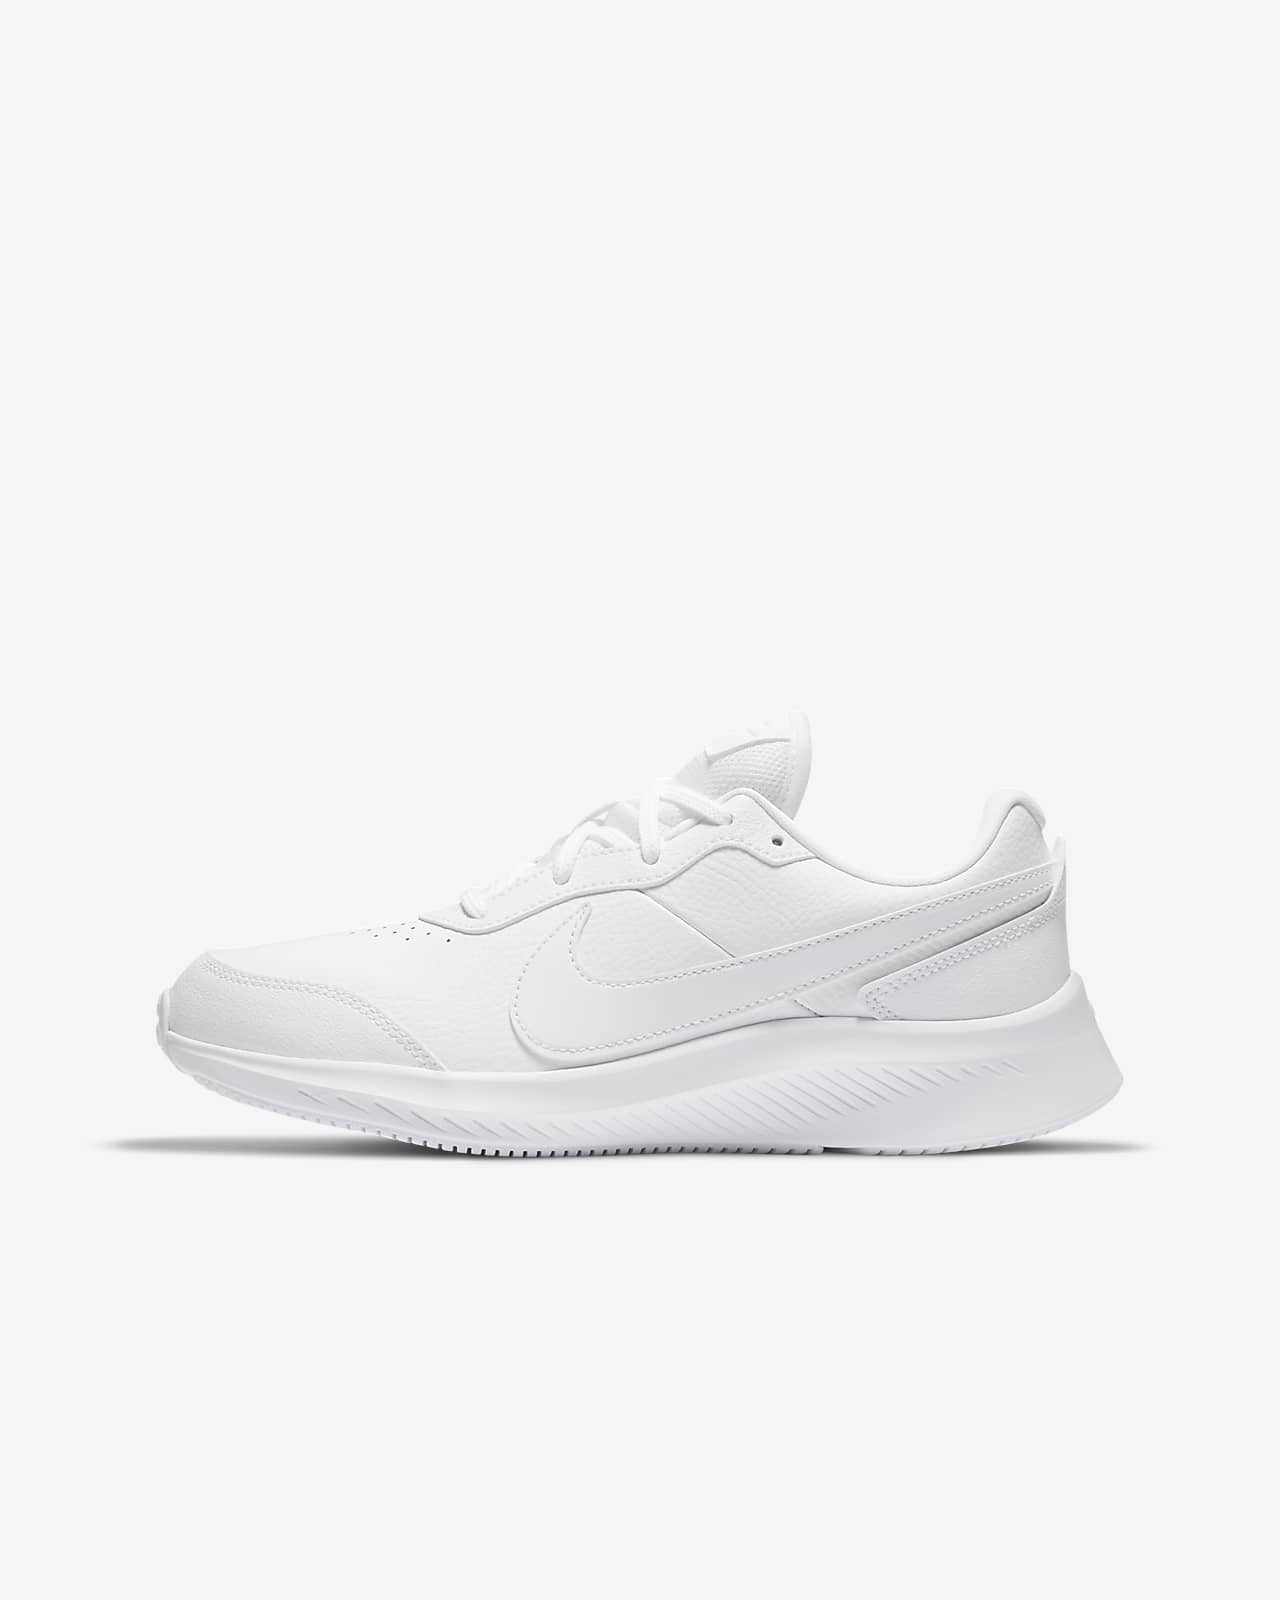 white nike shoes for boy kid